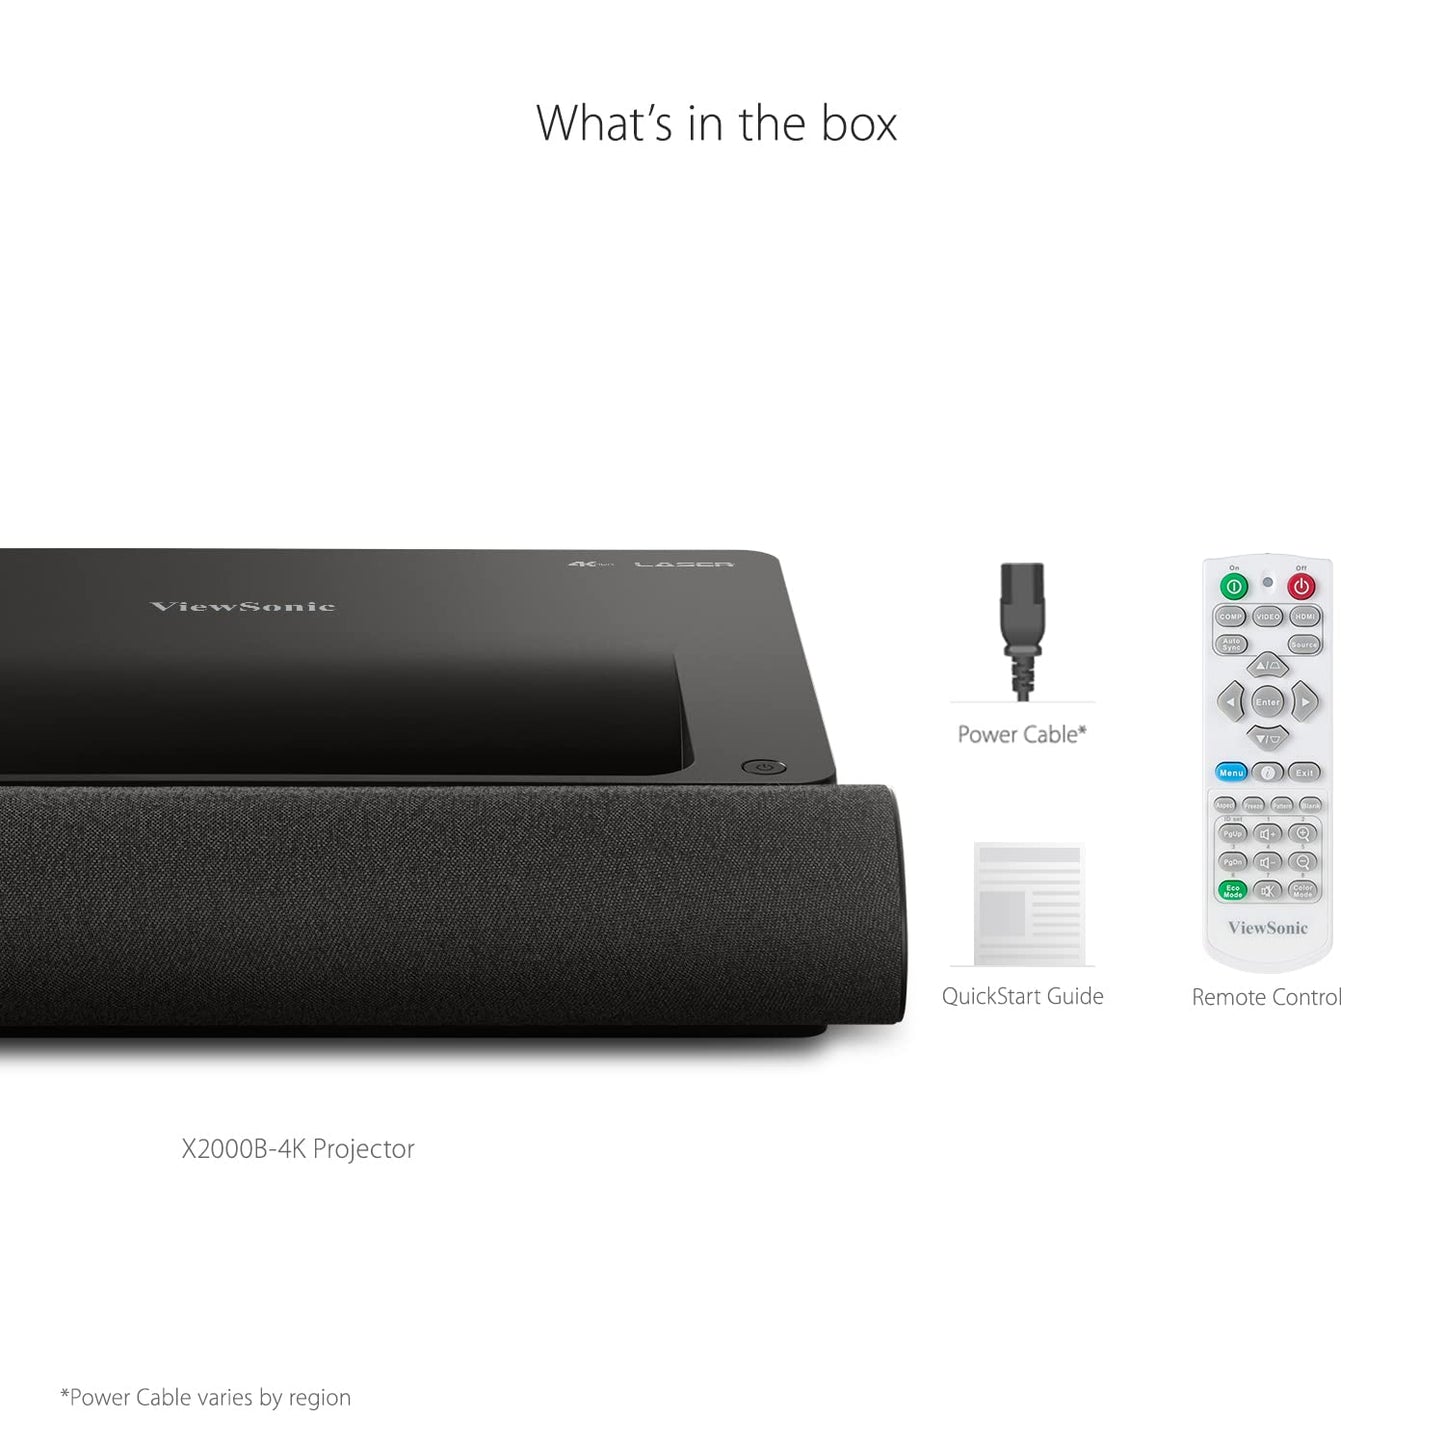 ViewSonic X2000B-4K Ultra Short Throw 4K UHD Laser Projector with 2000 Lumens, Wi-Fi Connectivity, Cinematic Colors, Dolby and DTS Soundtracks Support for Home Theater. Phil and Gazelle.